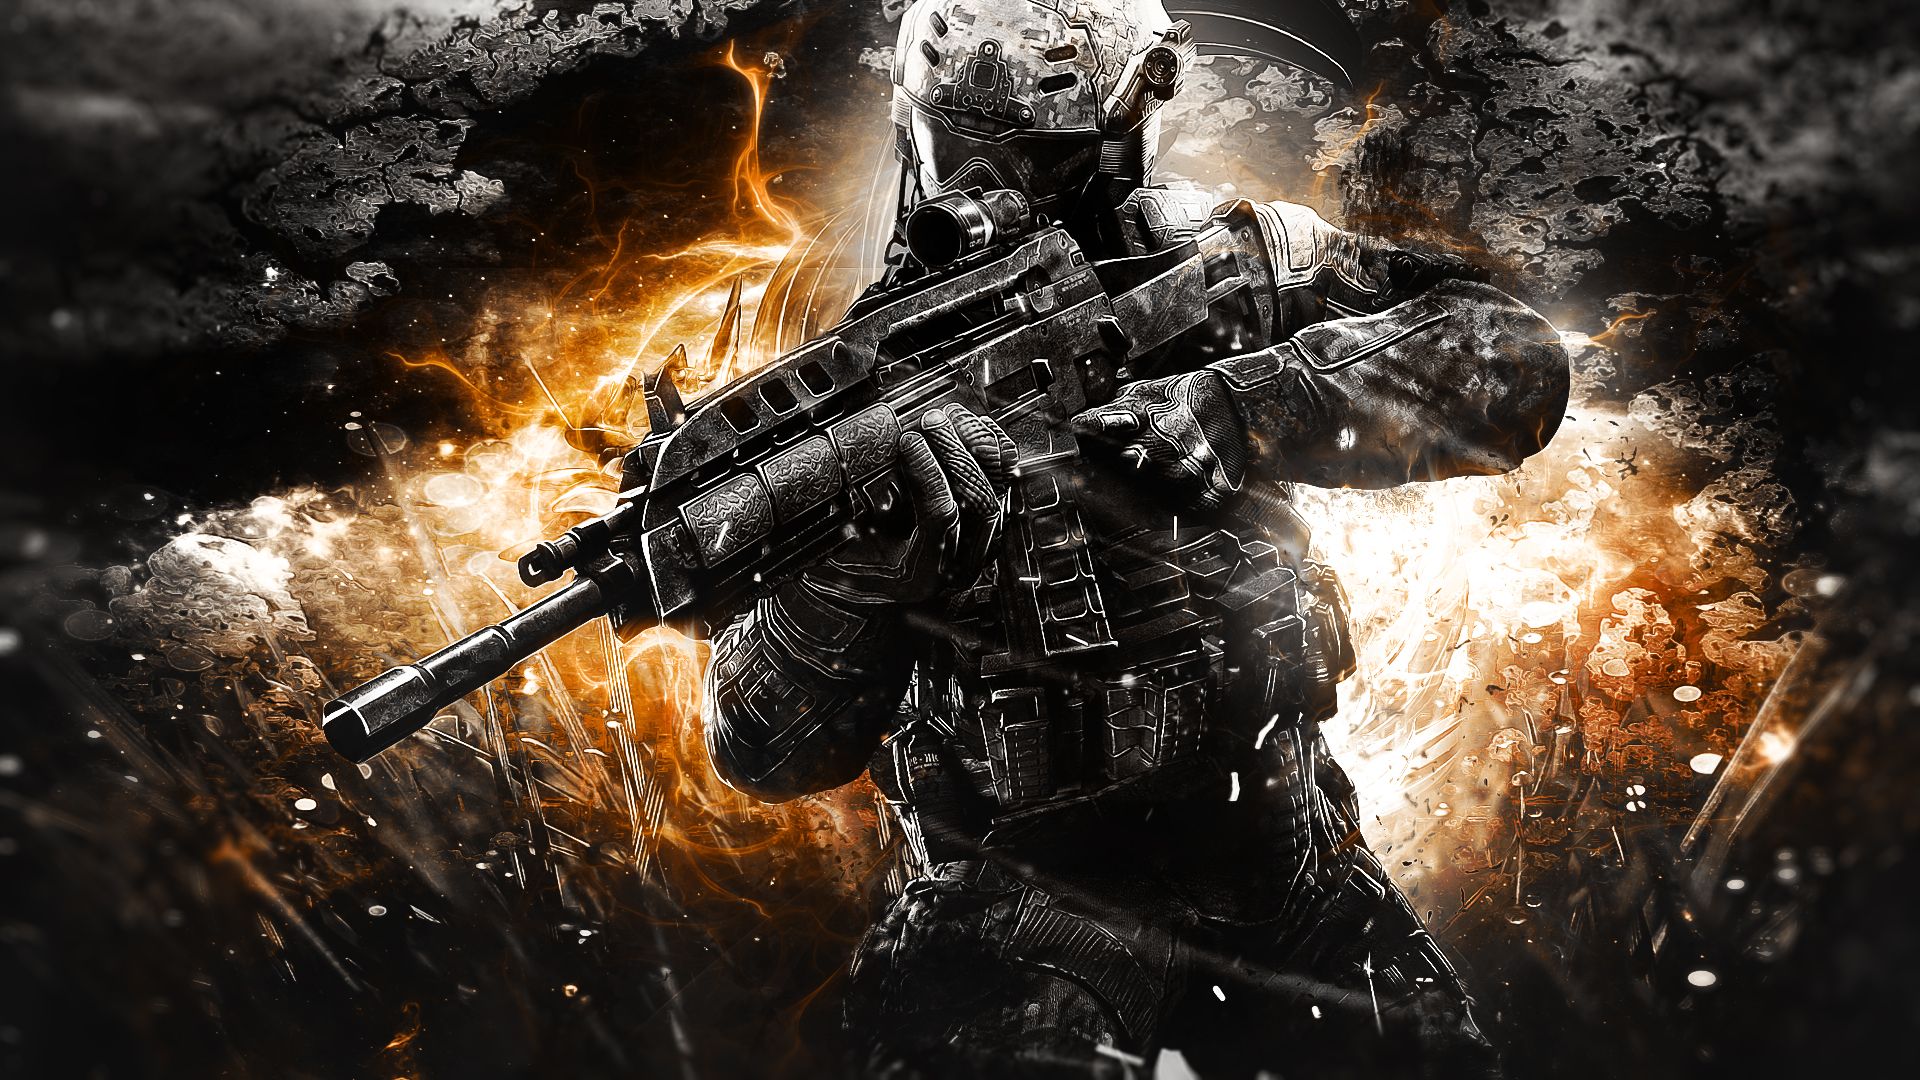 Call of Duty Windows Background. Xbox Wallpaper Call of D, Secret Diary of a Call Girl Wallpaper and Call of Duty Background